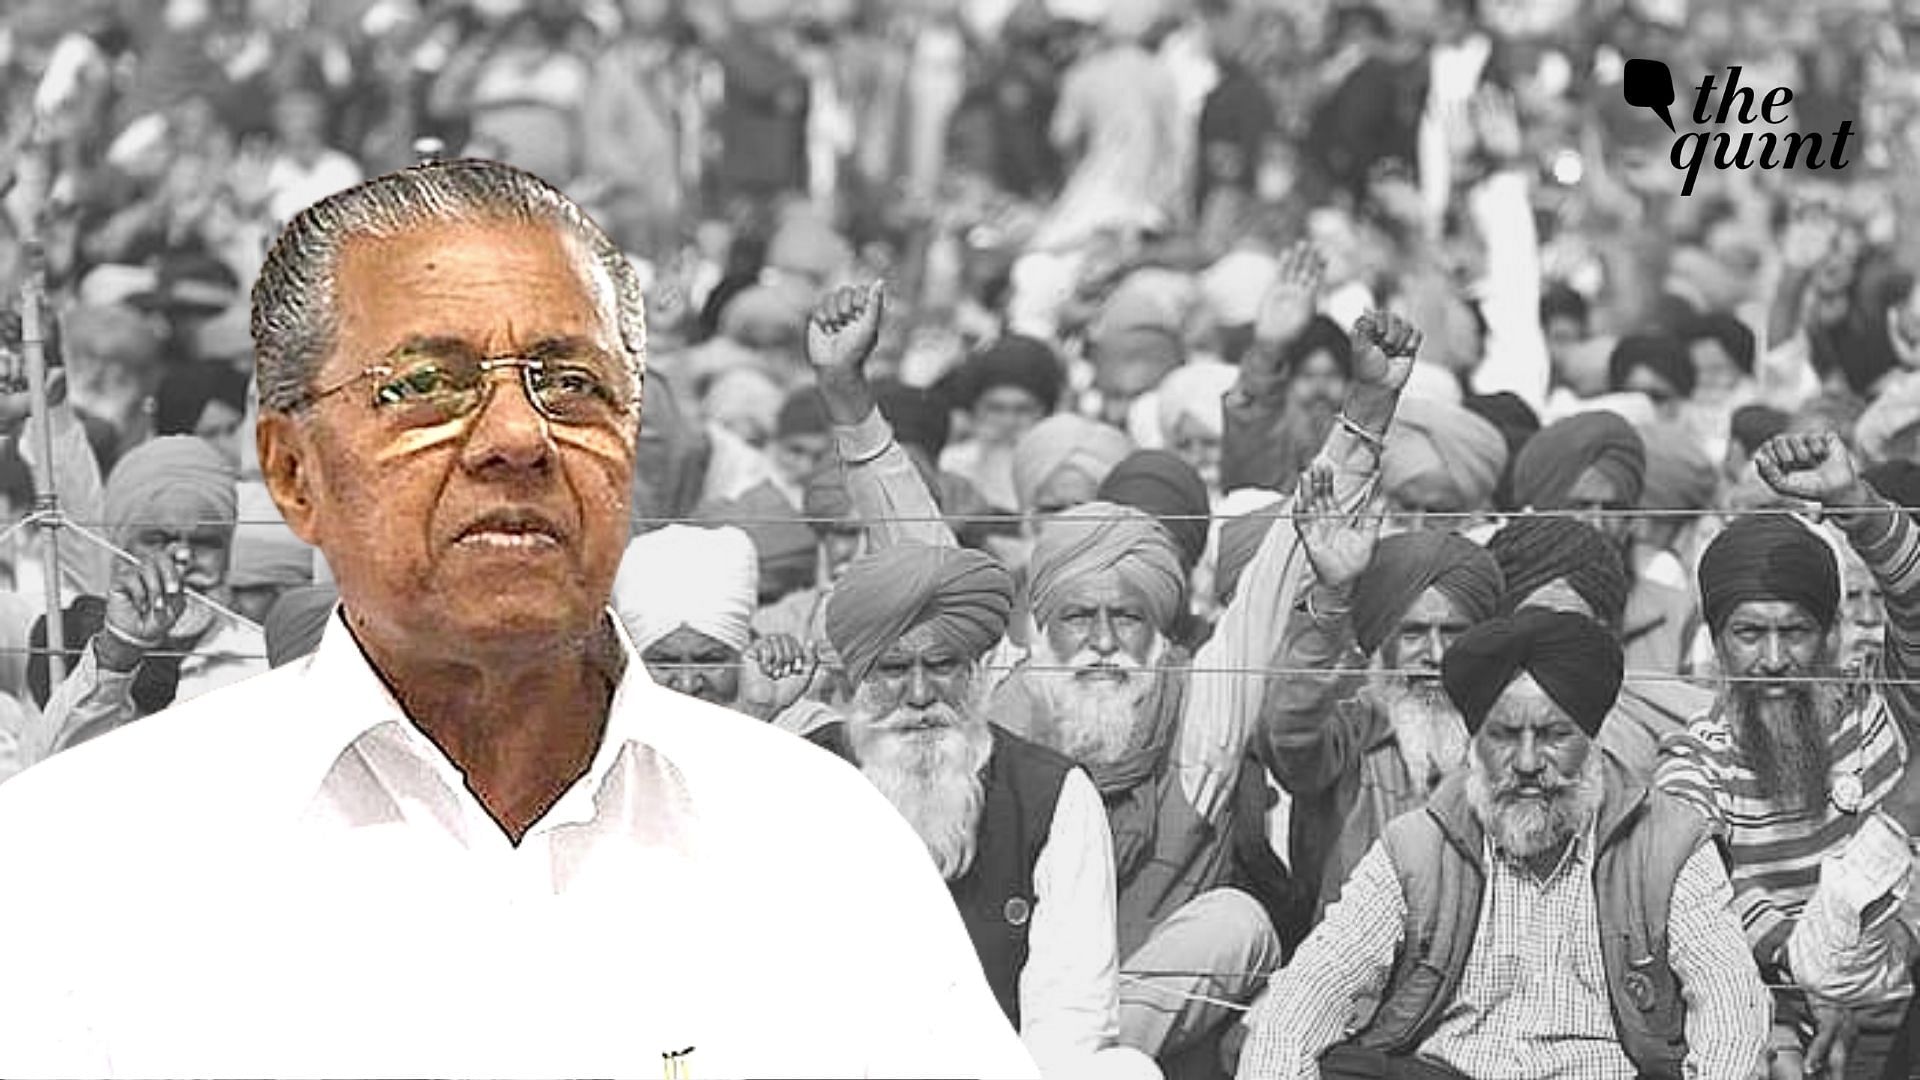 Kerala Chief Minister Pinarayi Vijayan moved a resolution in the Kerala Assembly on Thursday against the Centre’s contentious farm laws. Image used for representational purposes.